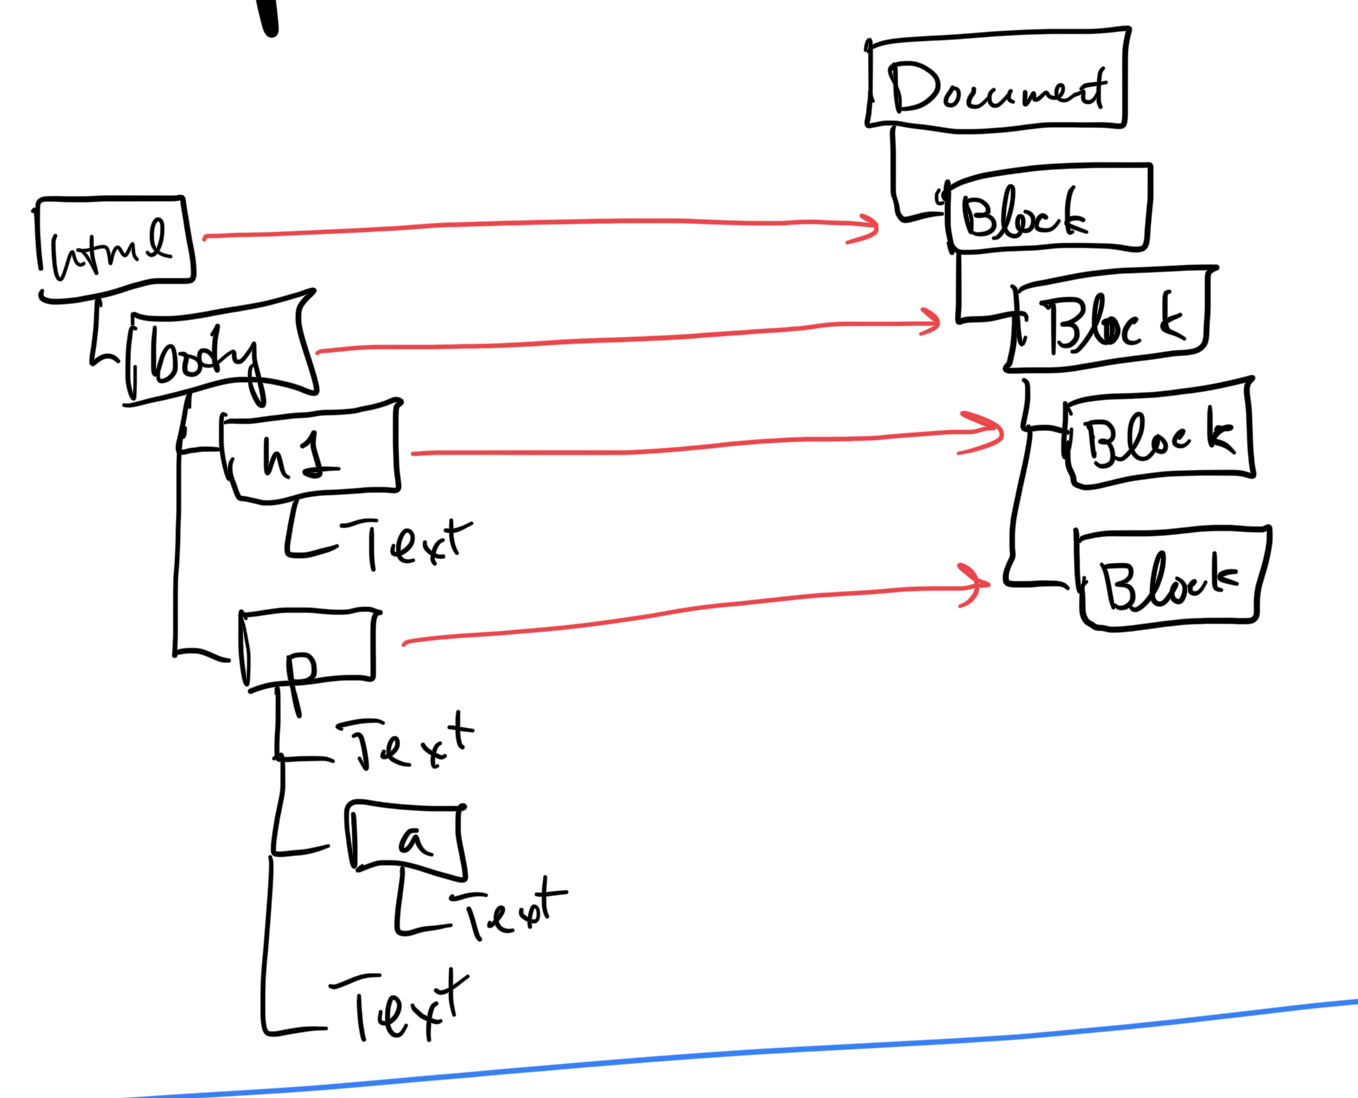 Figure 1: An example of an HTML tree and the corresponding layout tree.